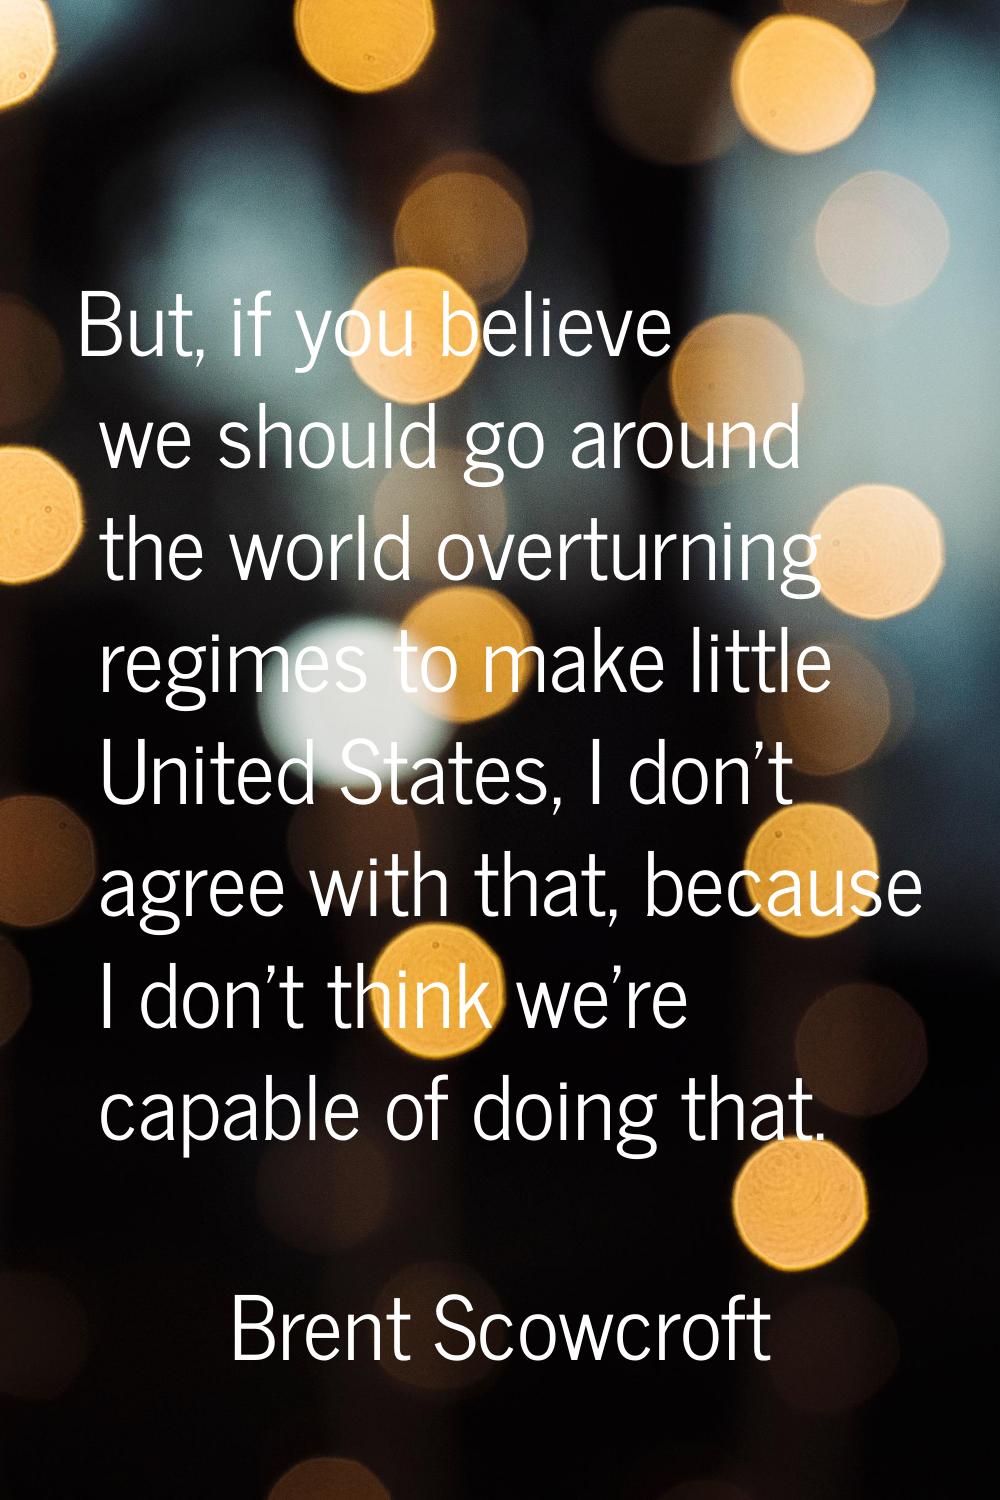 But, if you believe we should go around the world overturning regimes to make little United States,